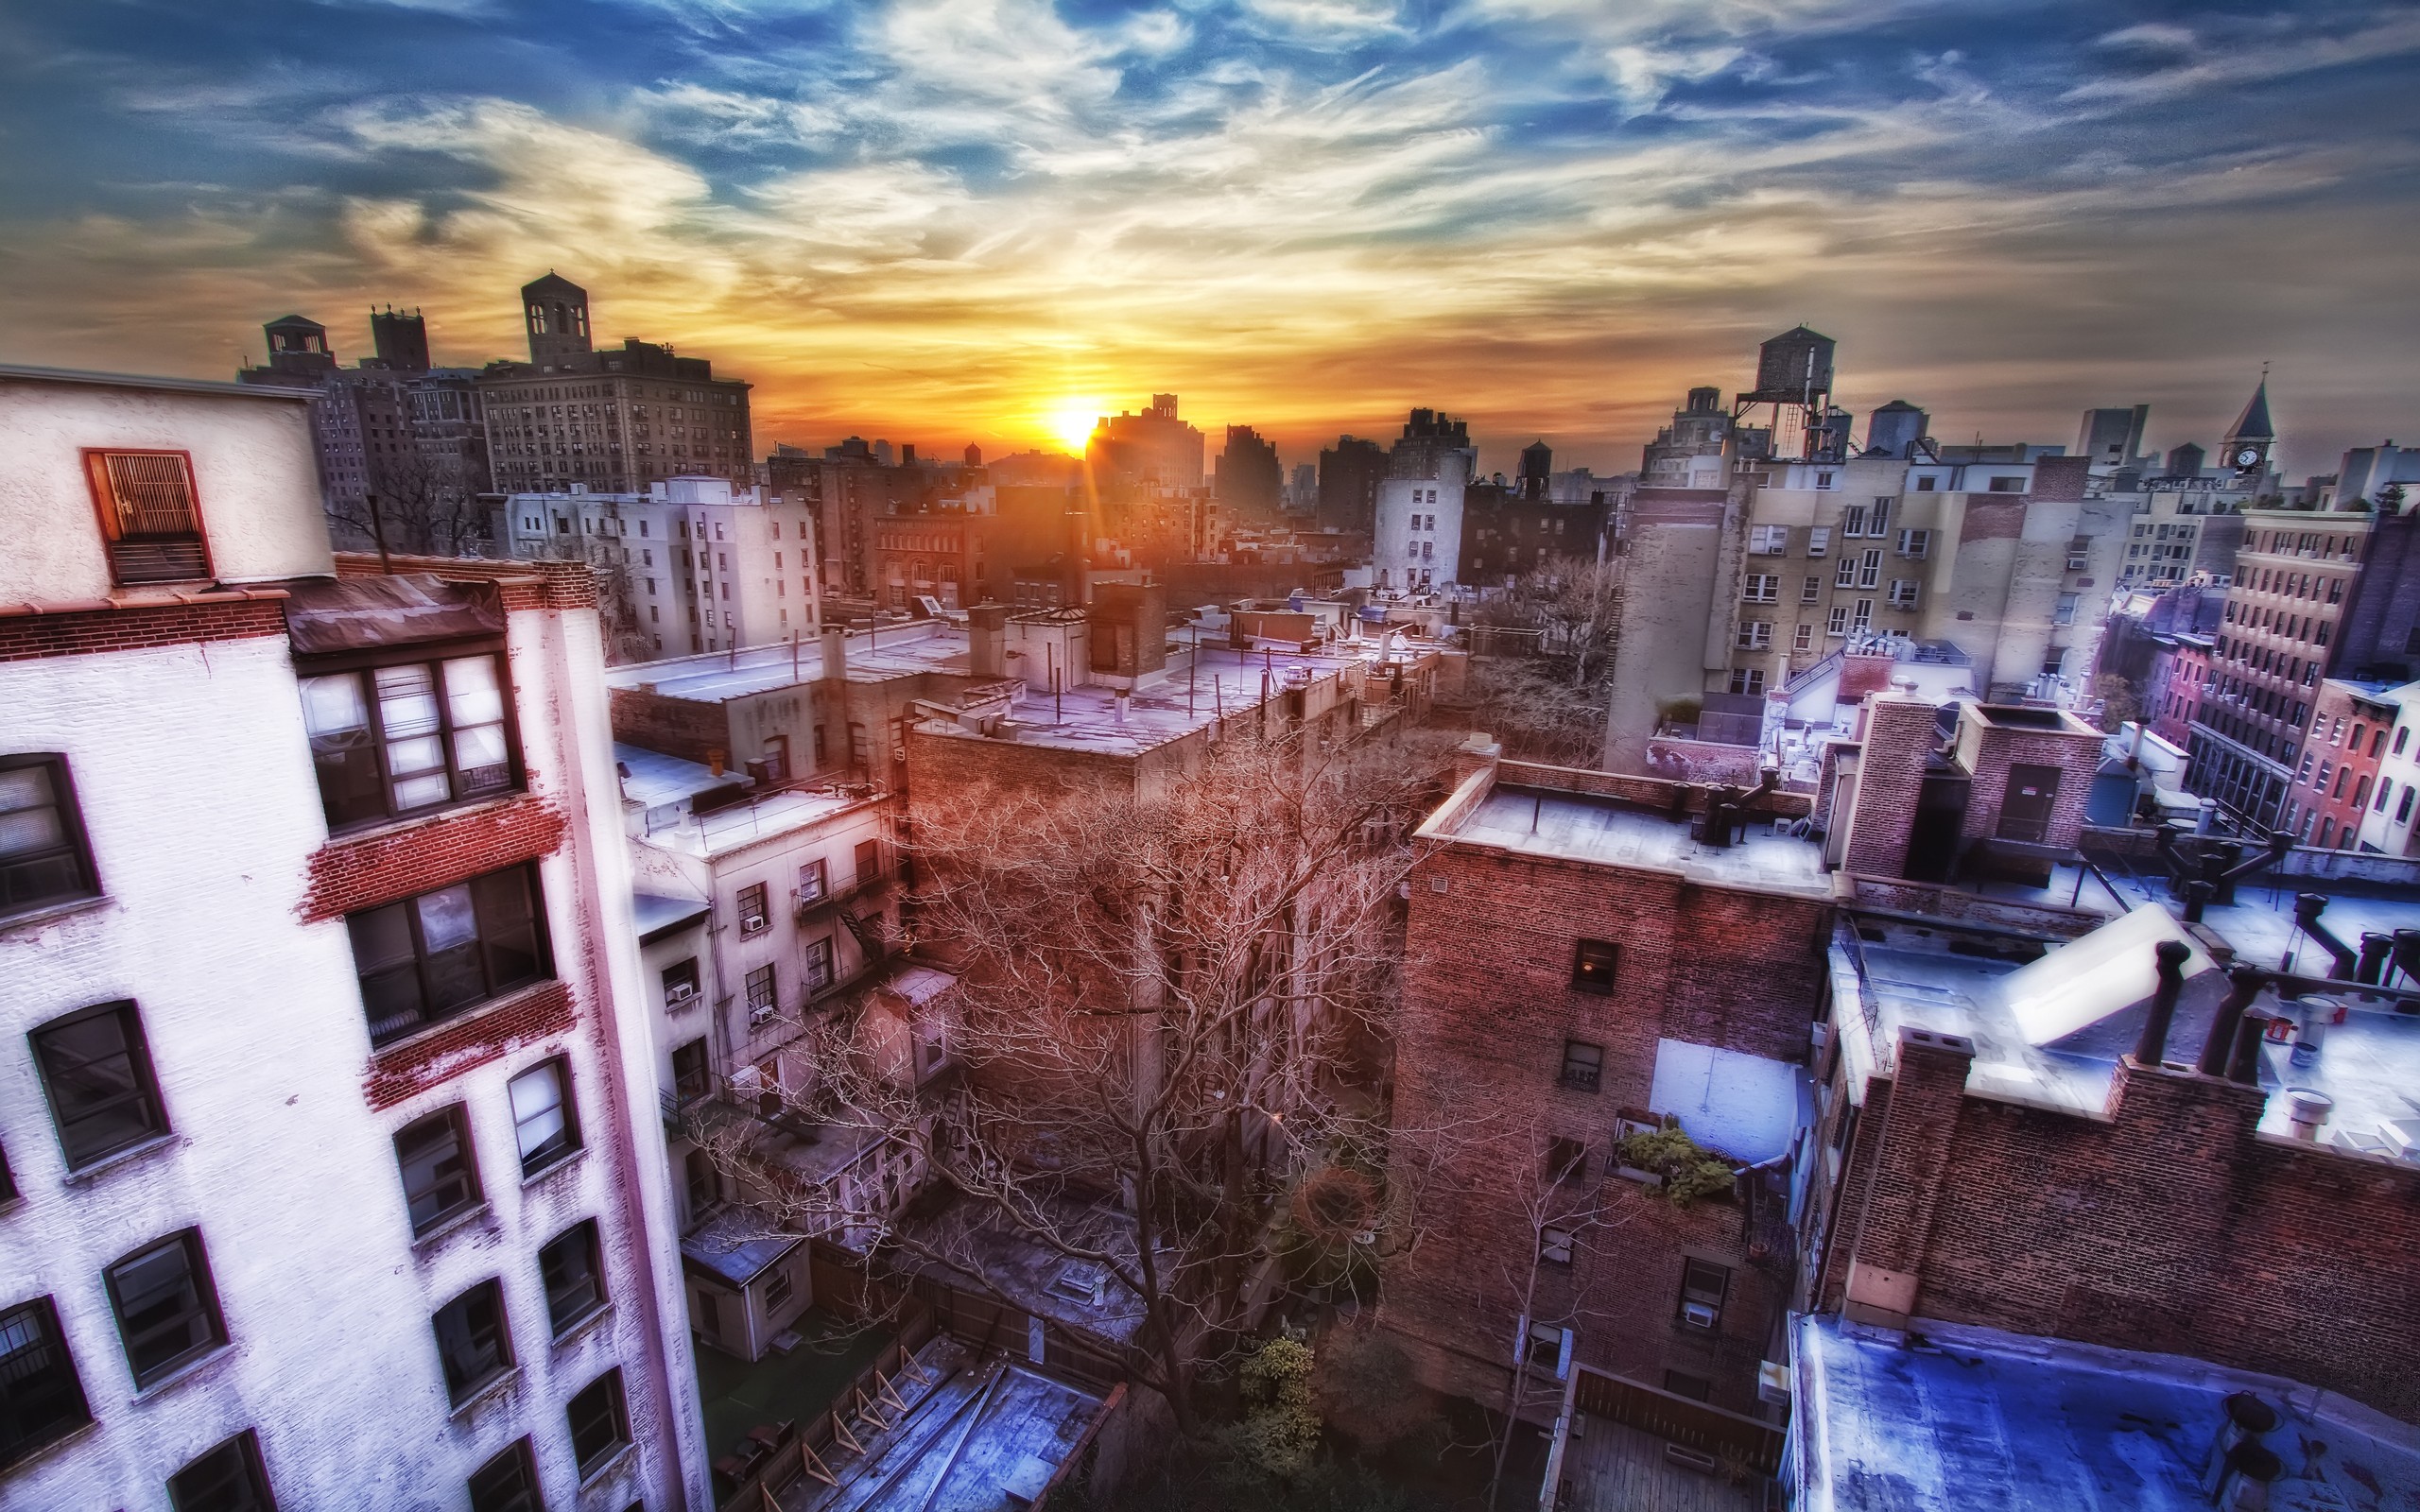 General 2560x1600 cityscape city building HDR sunset sky sunlight